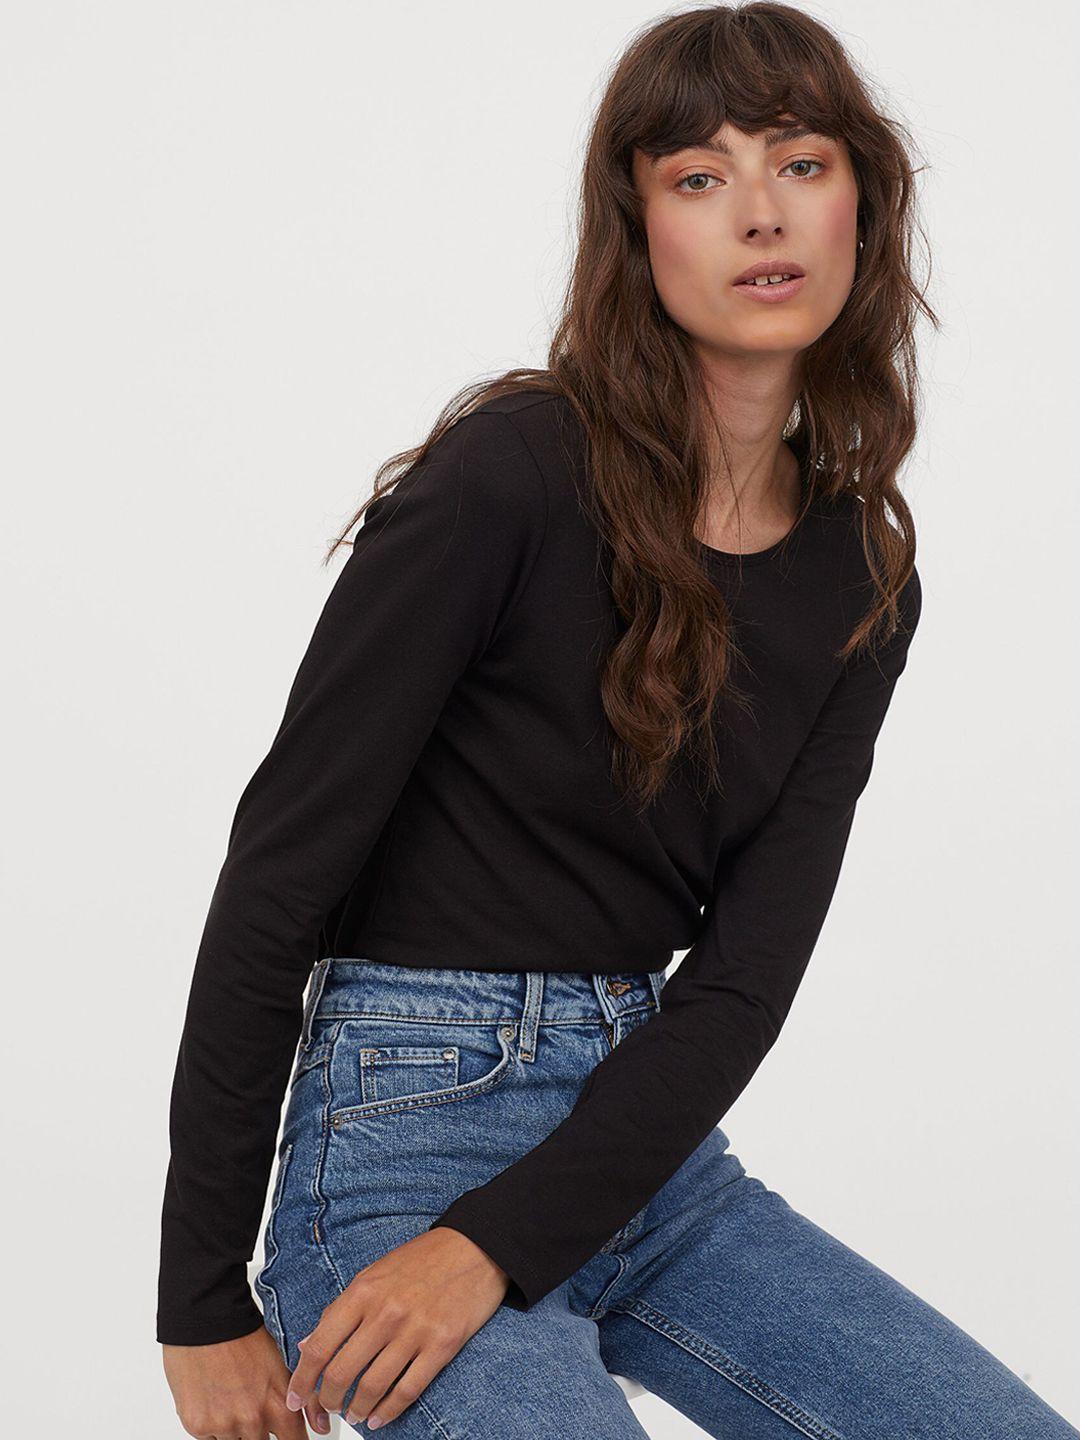 h&m women black solid long-sleeved jersey top